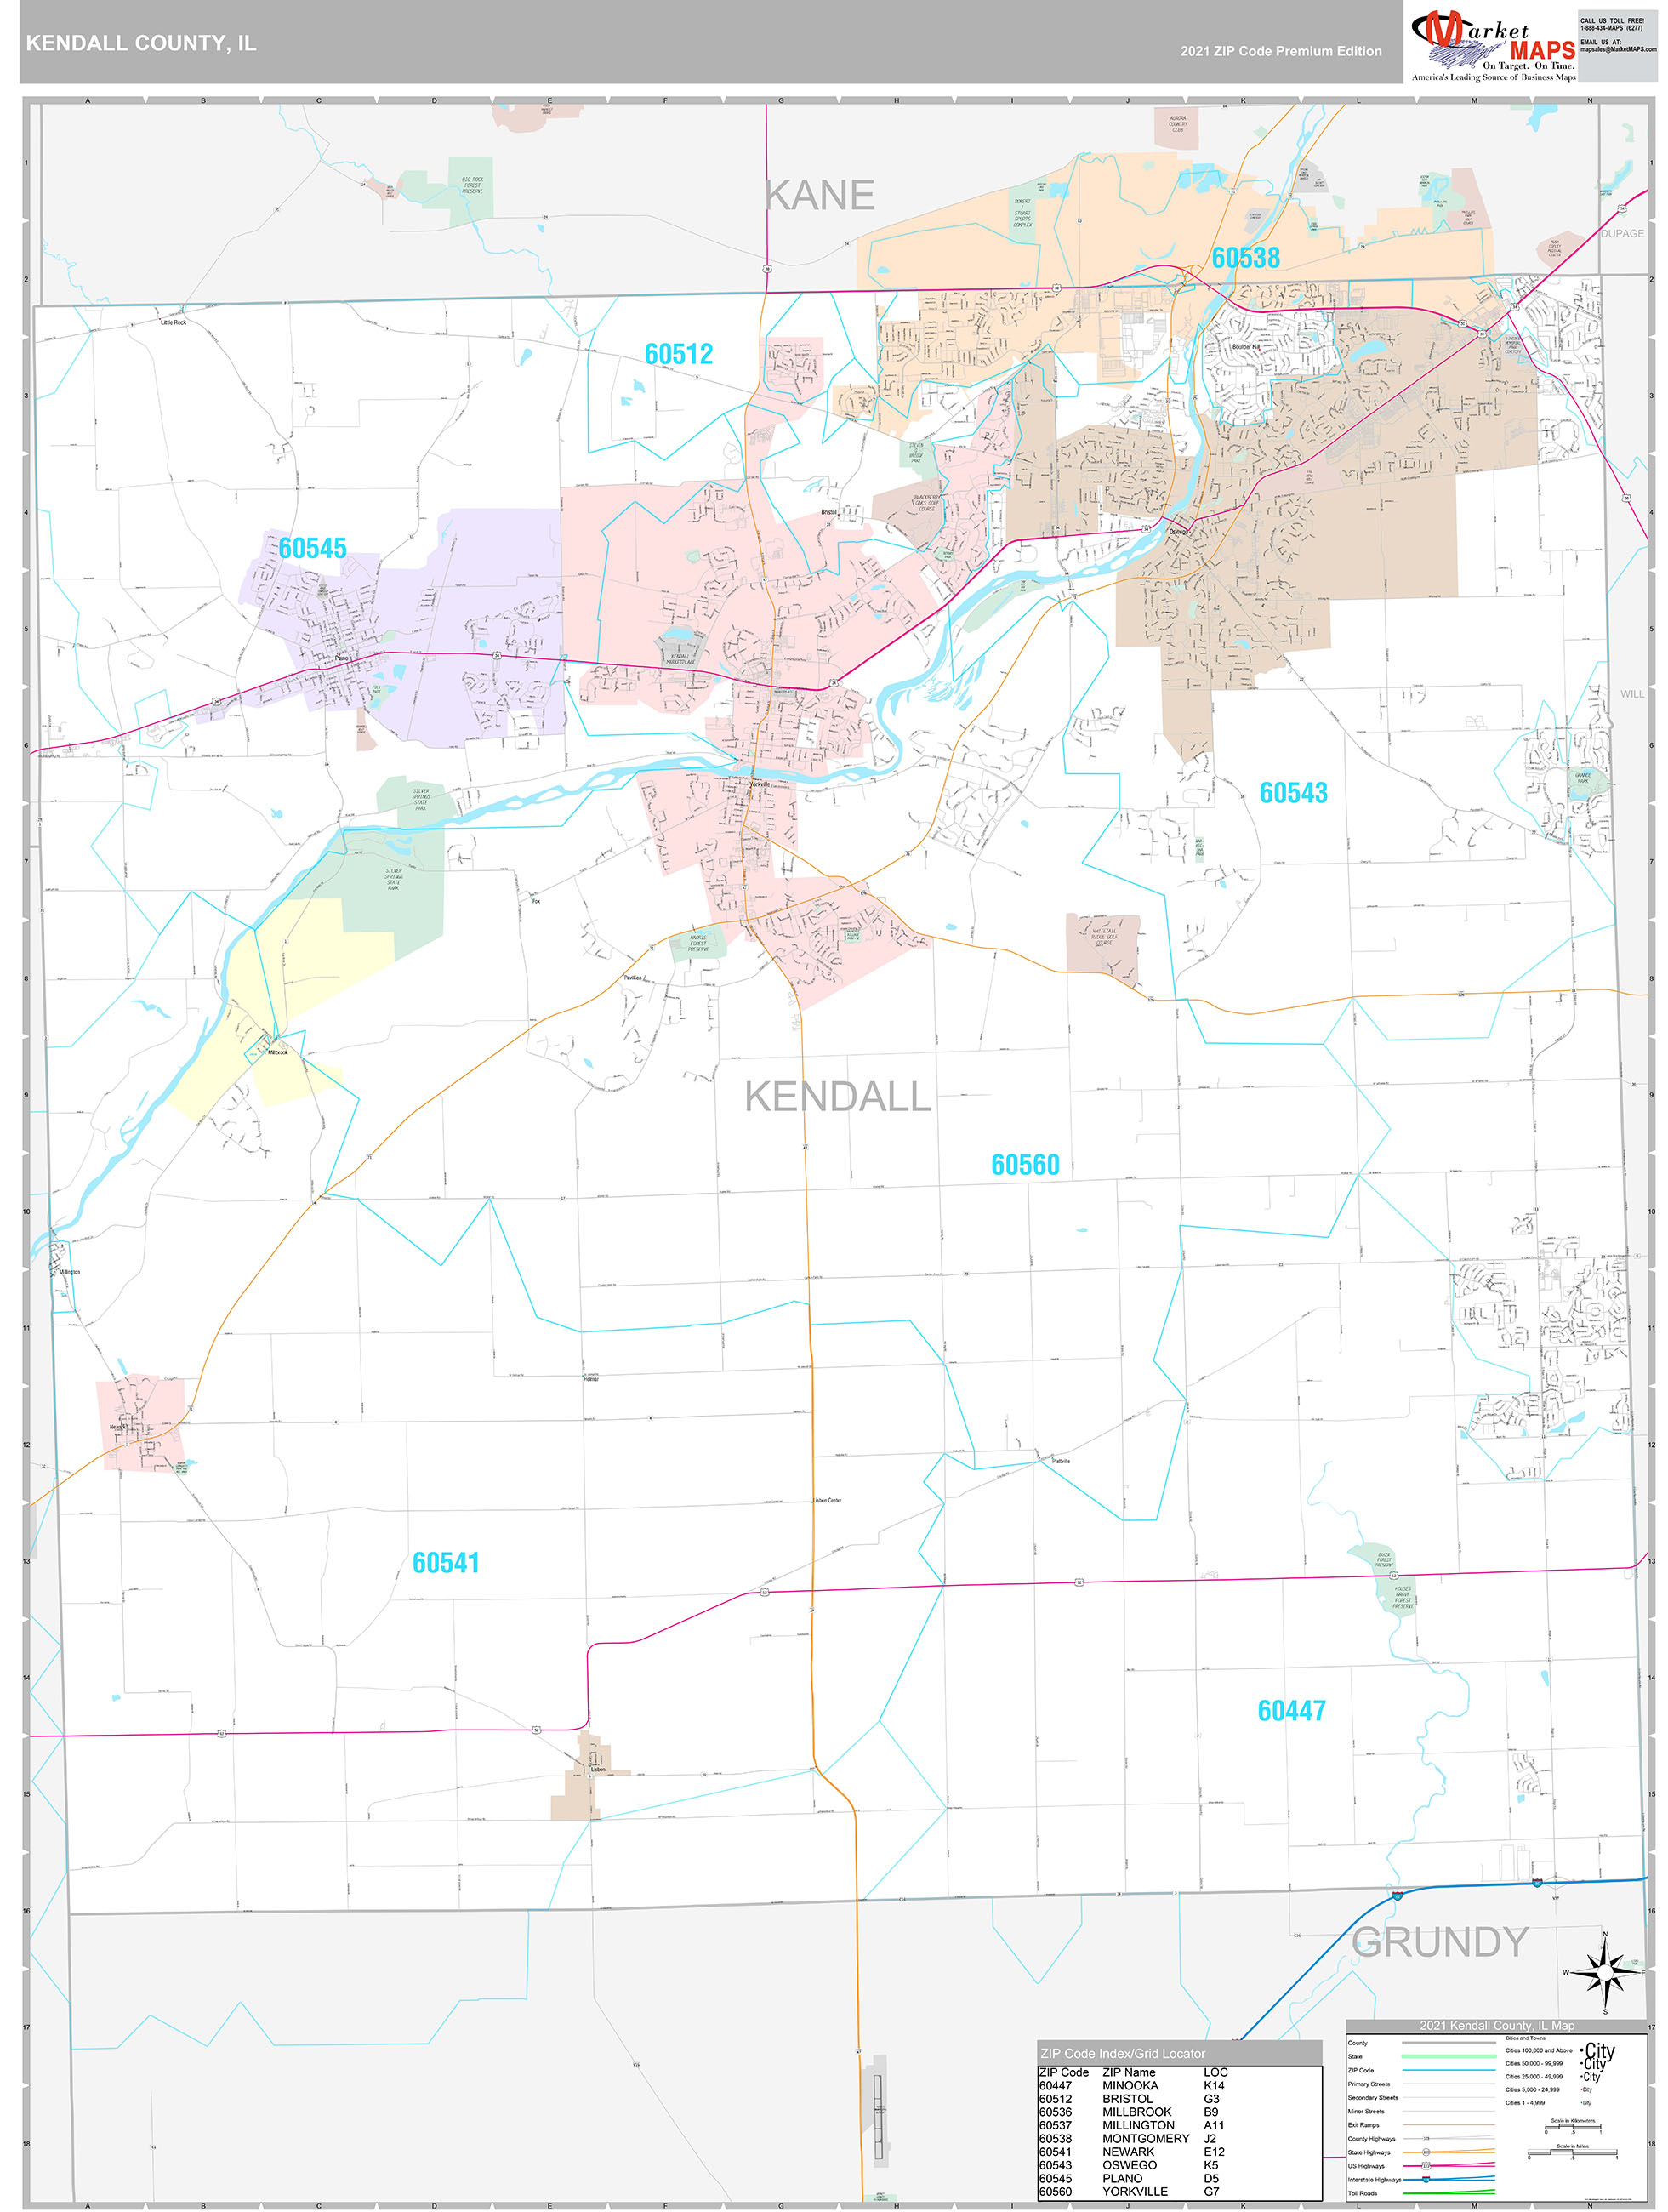 Kendall County IL Wall Map Premium Style by MarketMAPS MapSales